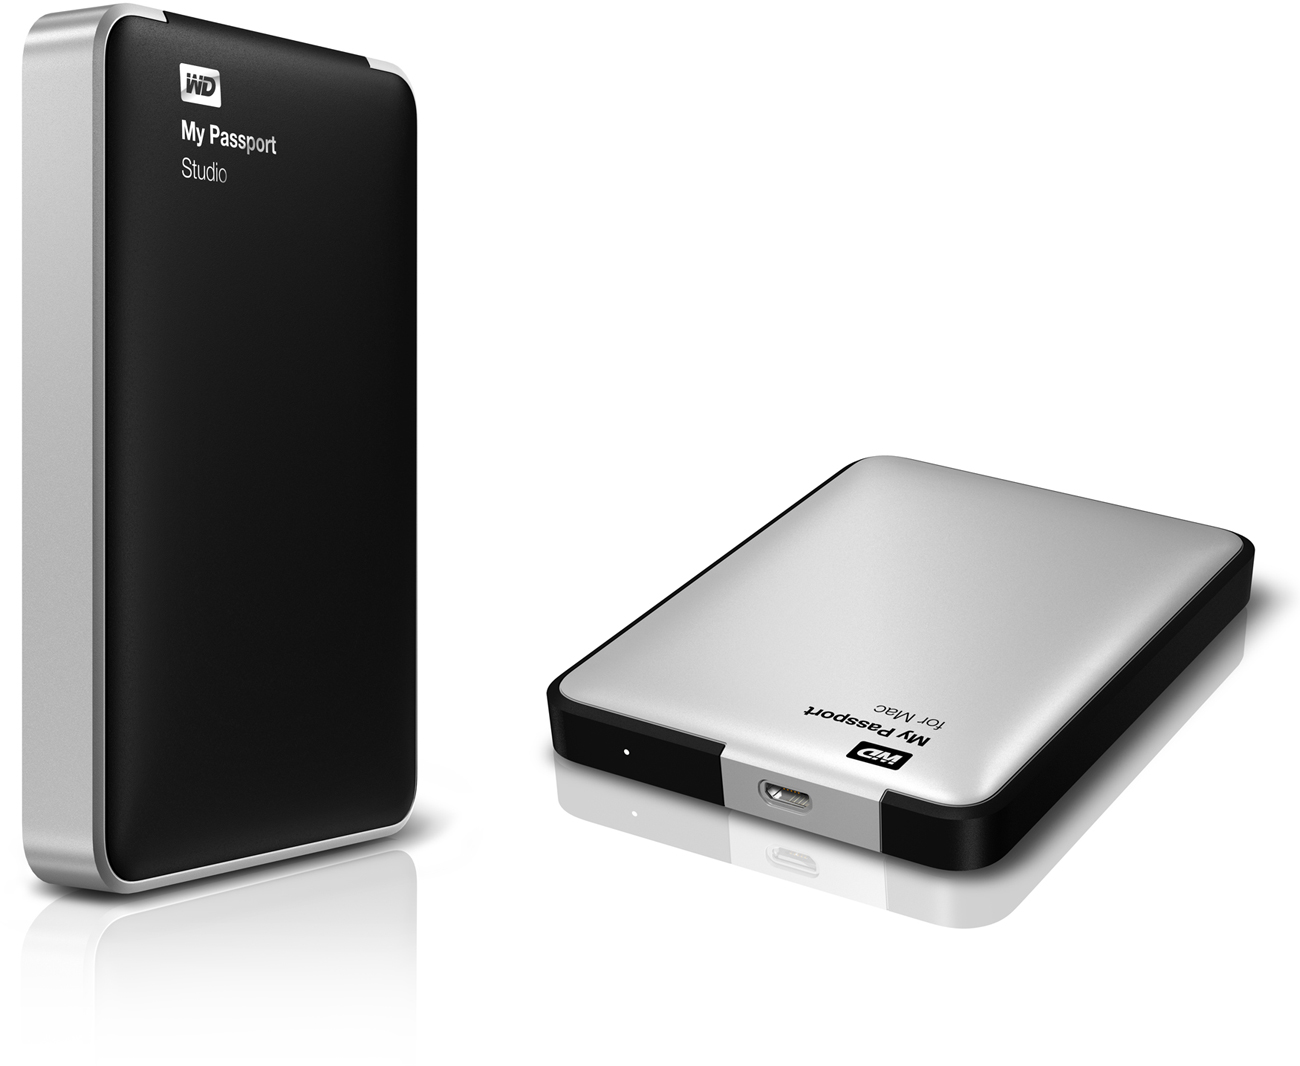 Western Digital launches two new external hard drives for Mac with a tasteful design